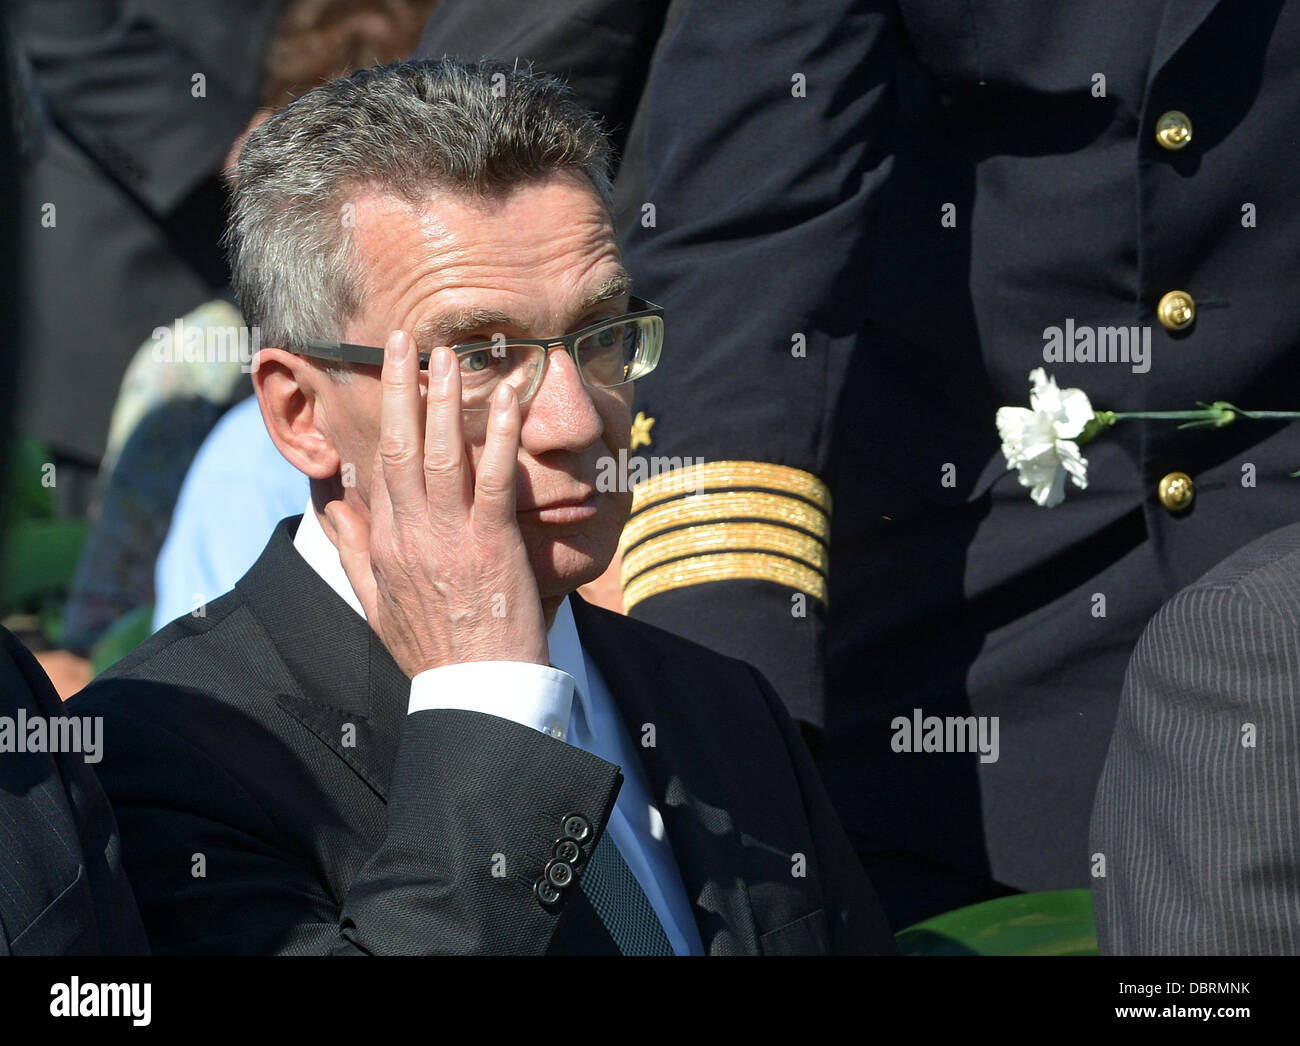 German Defence Minister Thomas de Maiziere wipes his eye during the dedication of the German military cemetery in Dukhovshchina, Smolensk Oblast, Russia, 03 August 2013. The cemetery is the last resting place for 70,000 German soldiers who died in Russia during World War II. Photo: UWE ZUCCHI Stock Photo